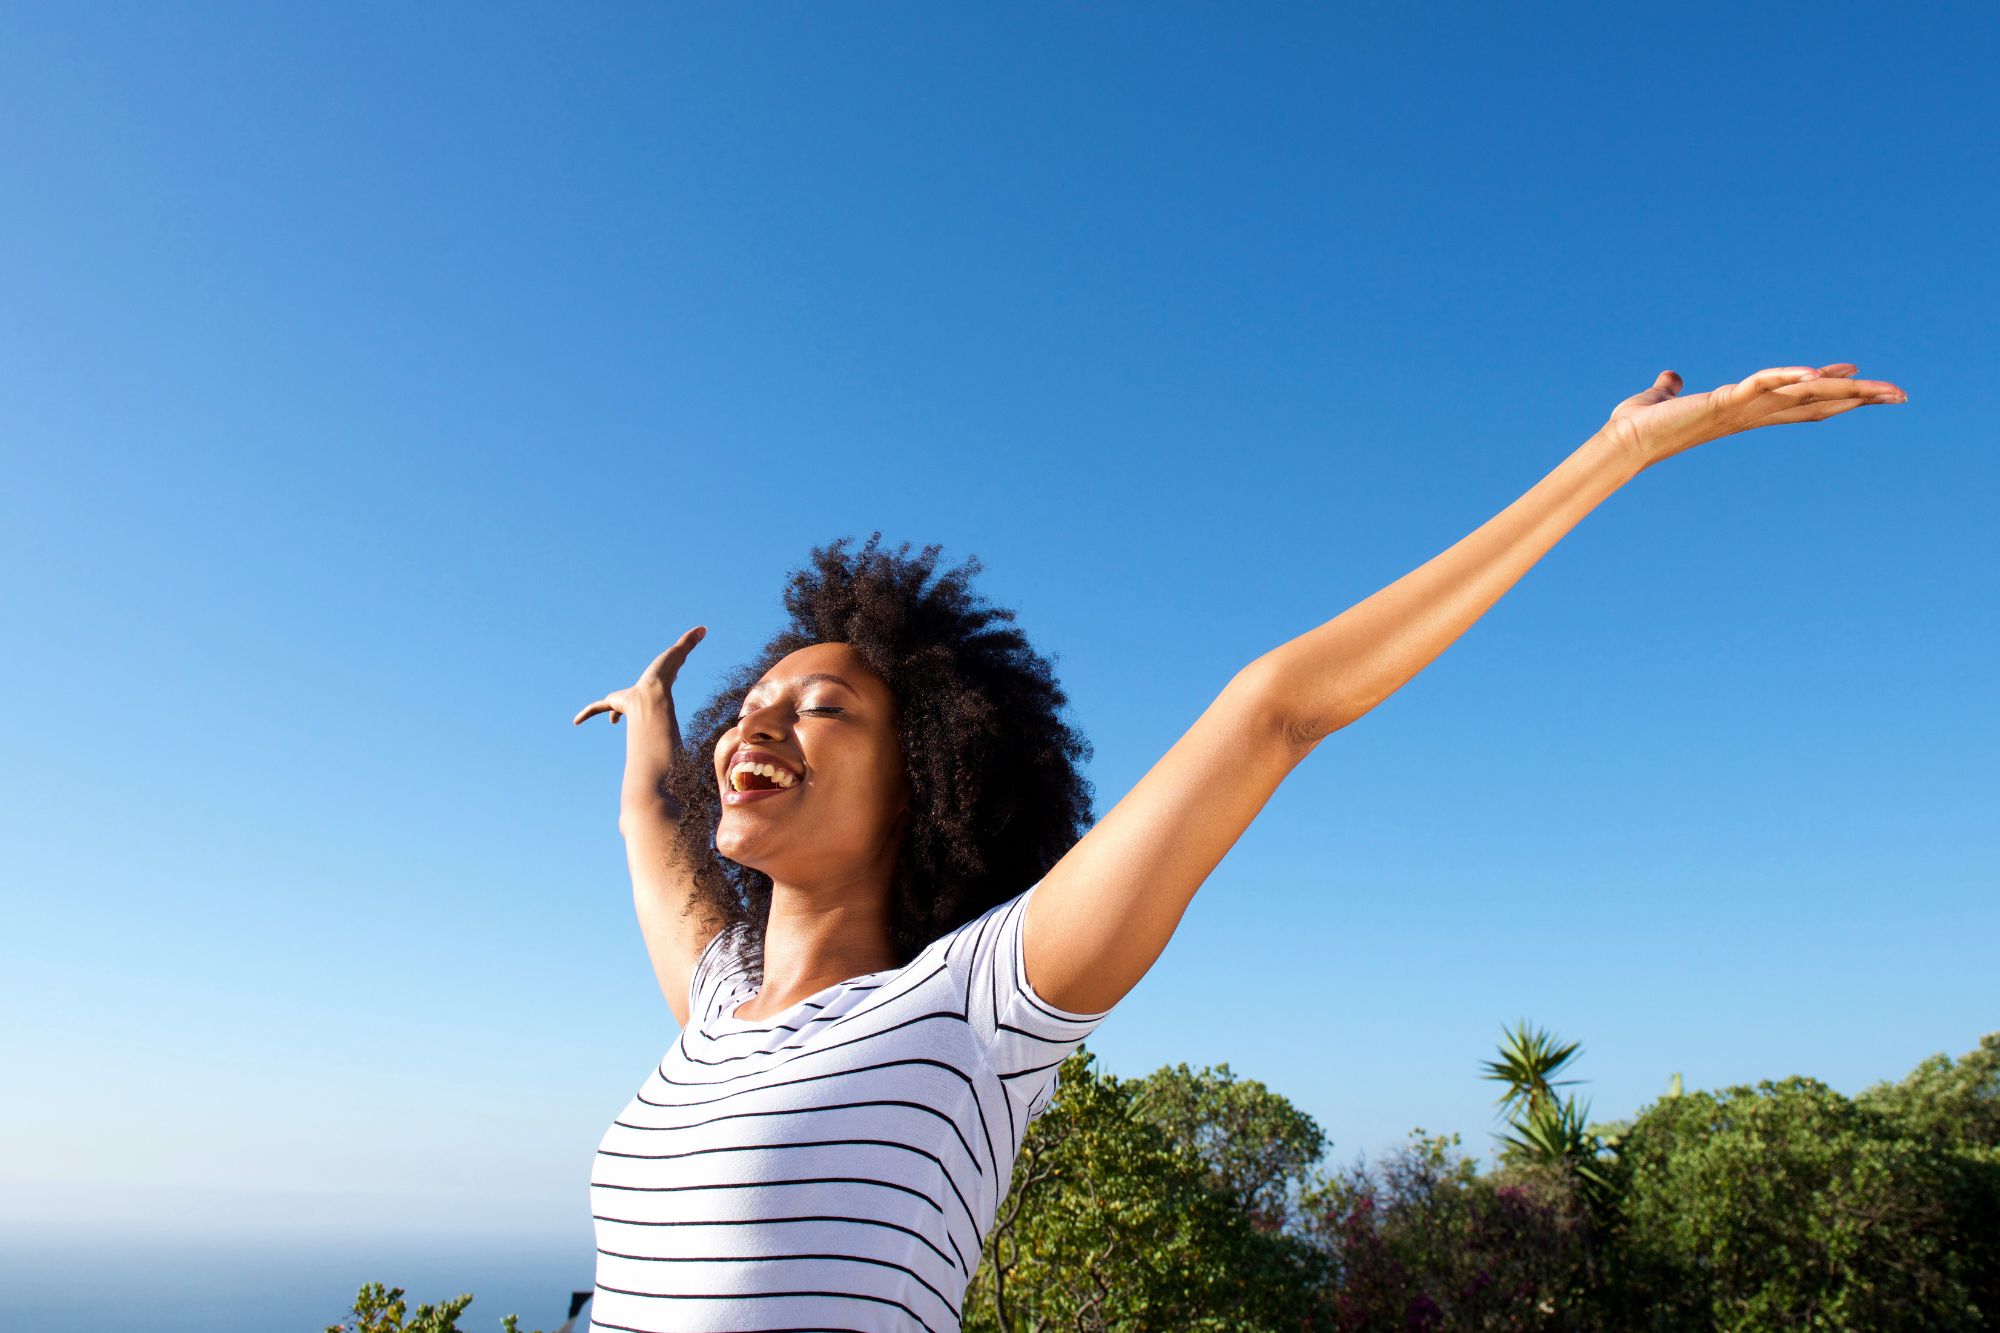 Joyful woman with her arms lifted in celebration as she considers the 5 tips for a happier life after divorce